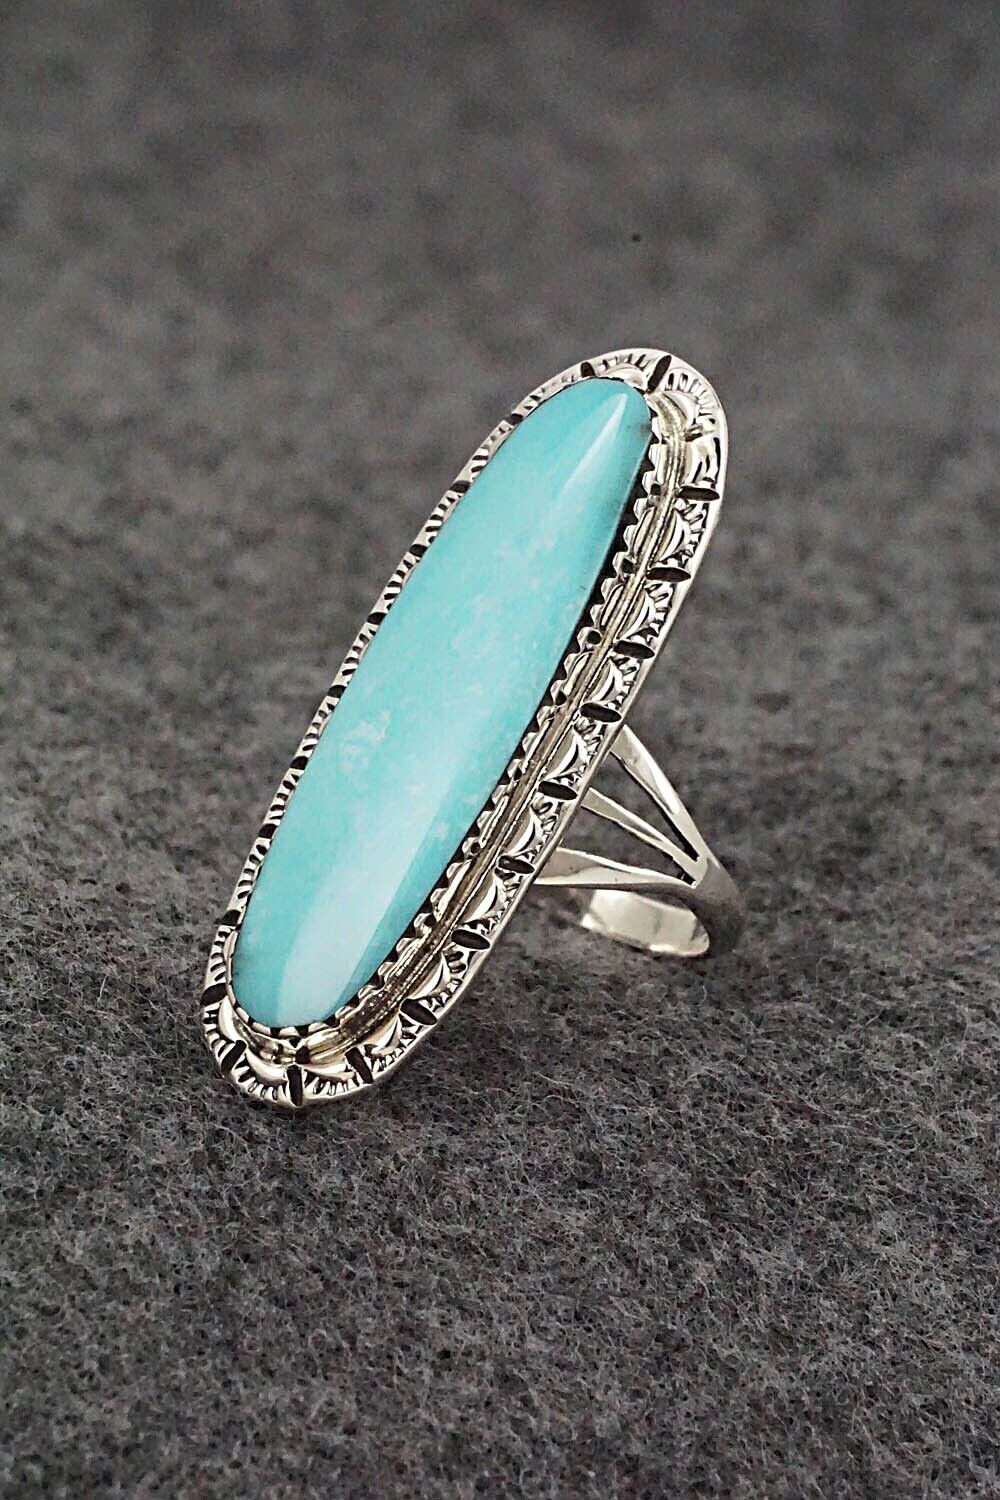 Turquoise & Sterling Silver Ring - Mike Smith - Size 8